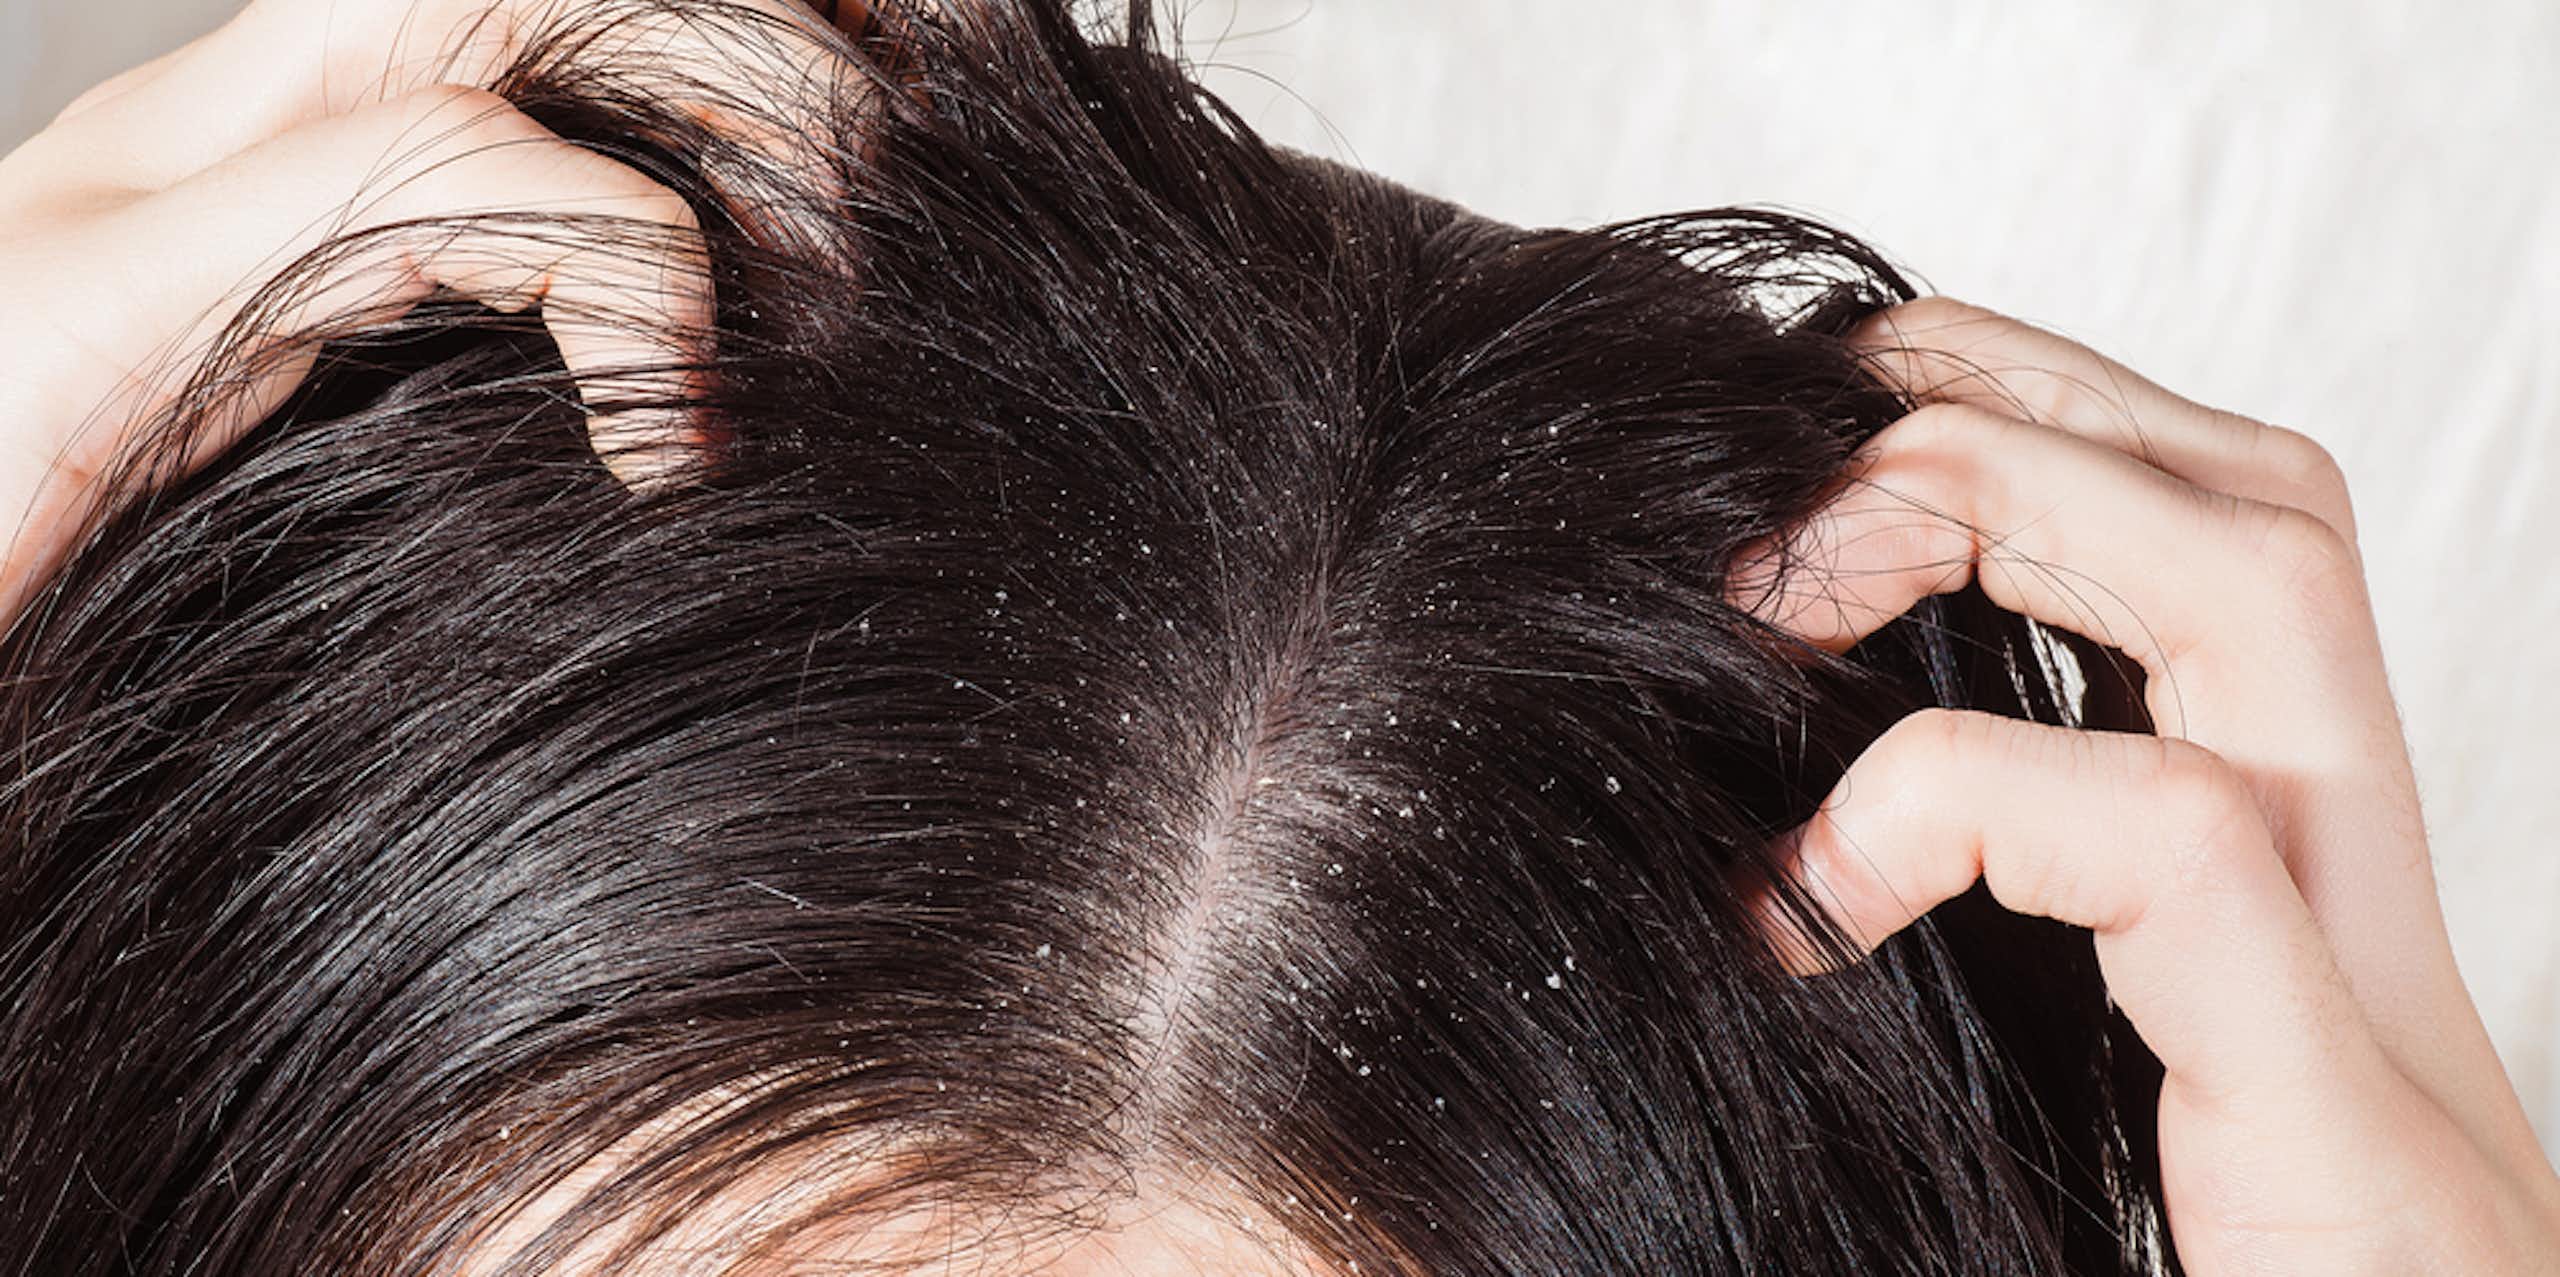 Person scratching head with dandruff visible in dark hair